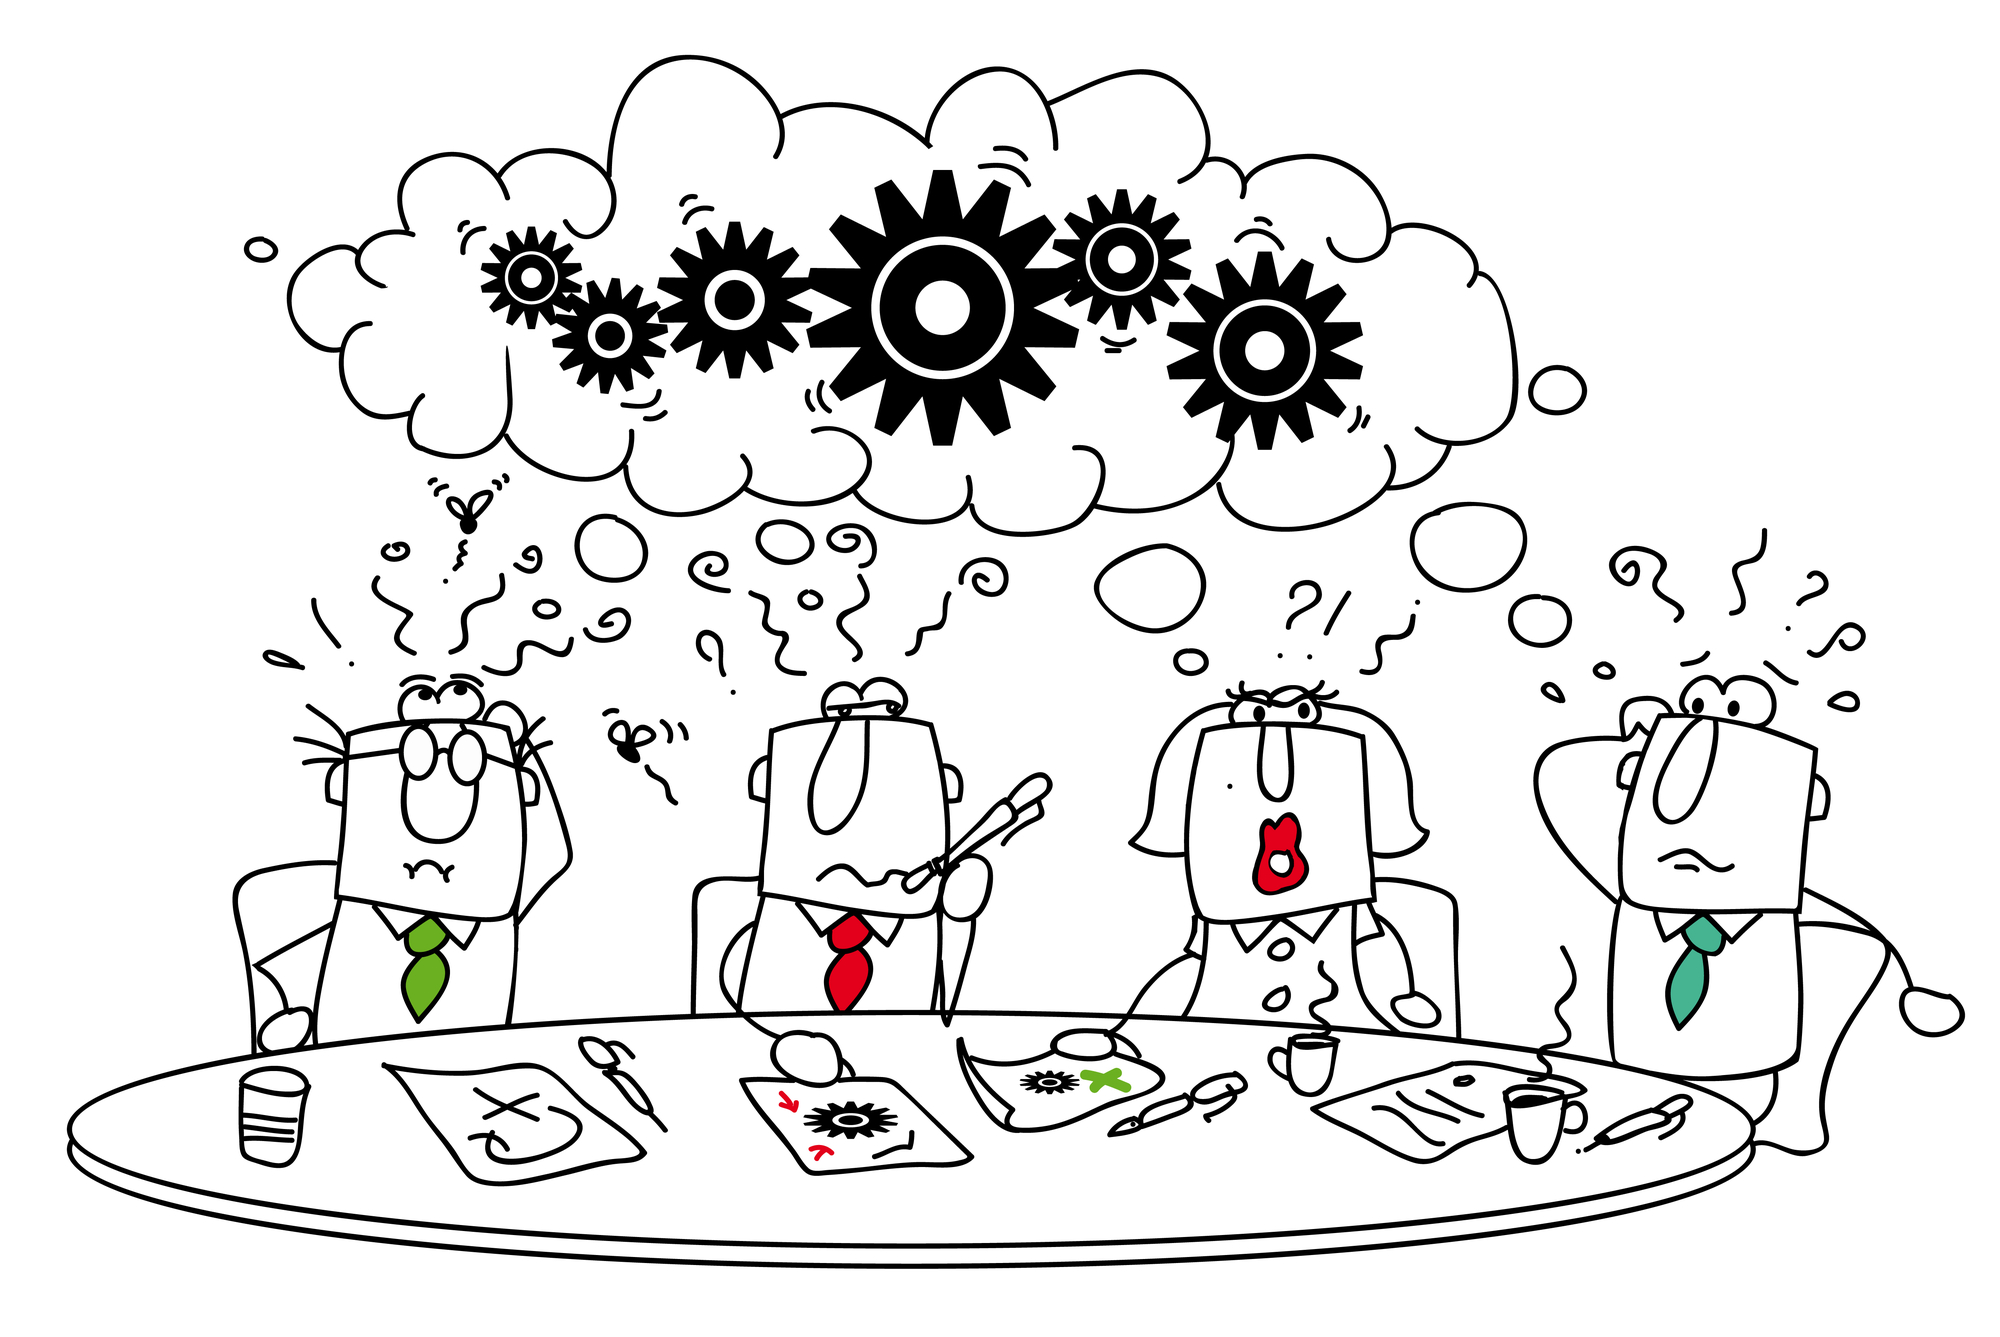 A cartoon of three people brainstorming with a cloud of spinning cogs above them.